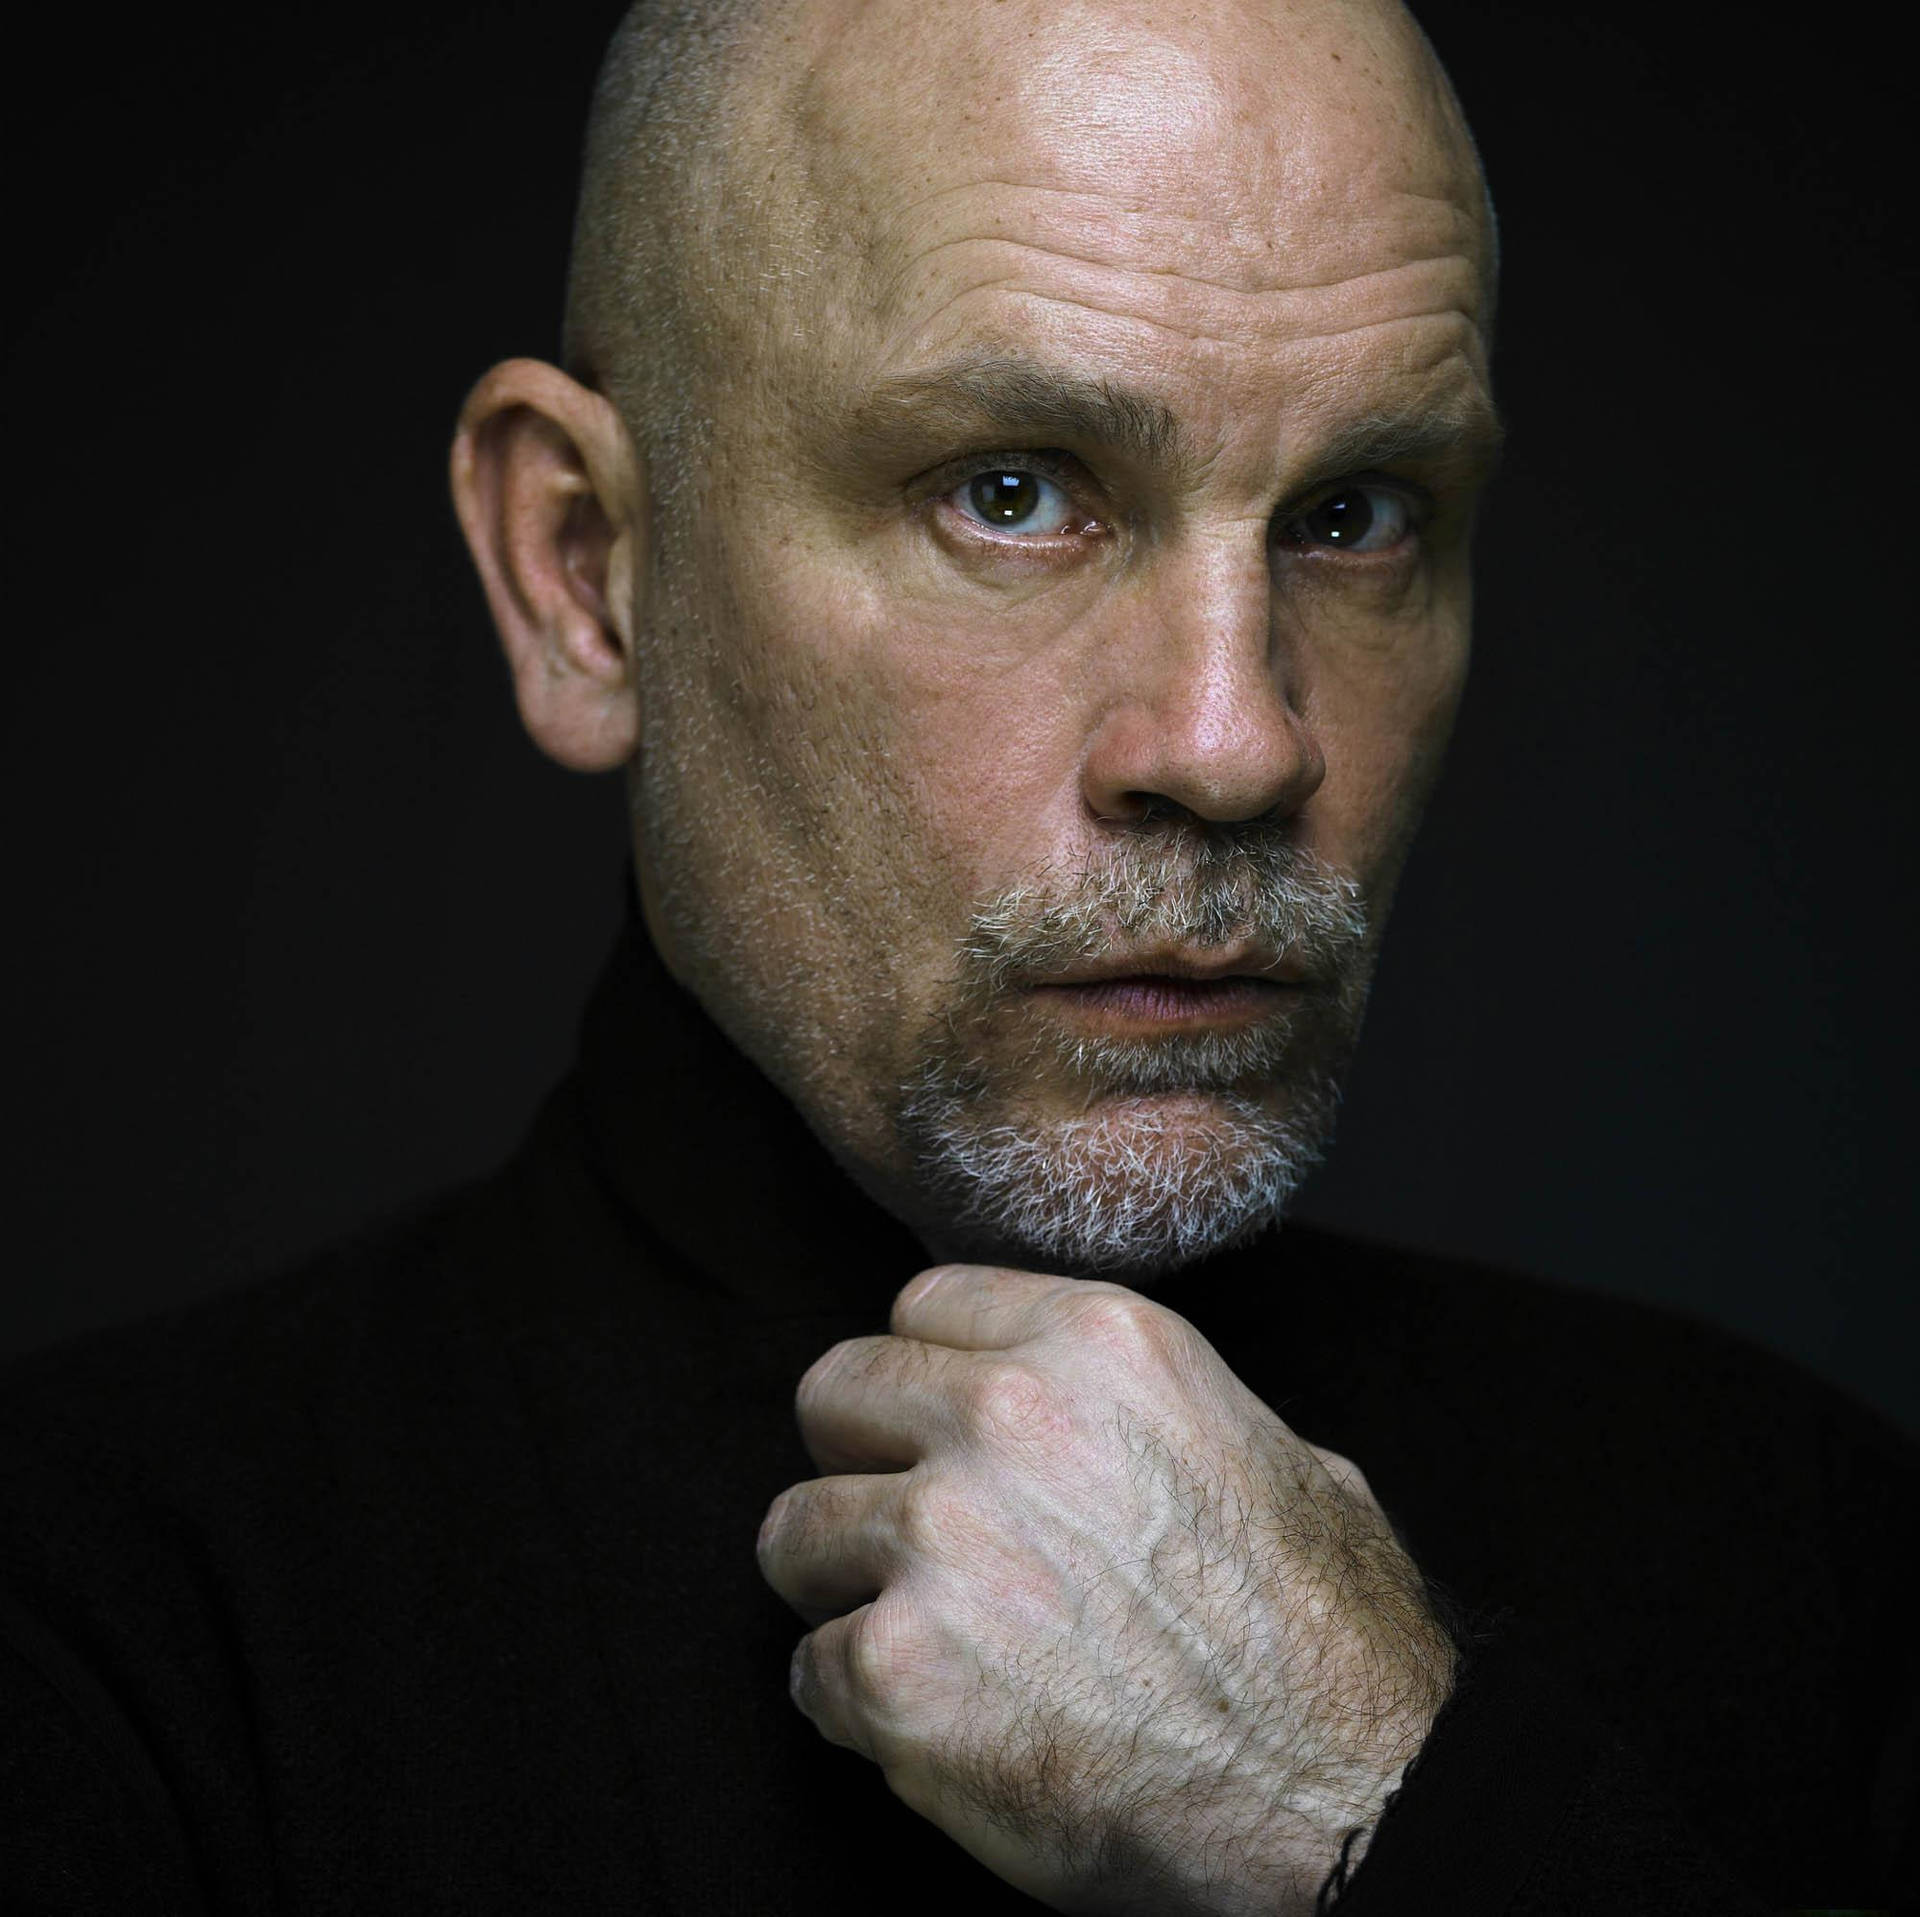 Johnmalkovich, Vinnaren Av Primetime Emmy Awards. (note: This Doesn't Necessarily Have Anything To Do With Computer Or Mobile Wallpaper Specifically, But It Is A Clear Translation Of The Given Sentence.) Wallpaper